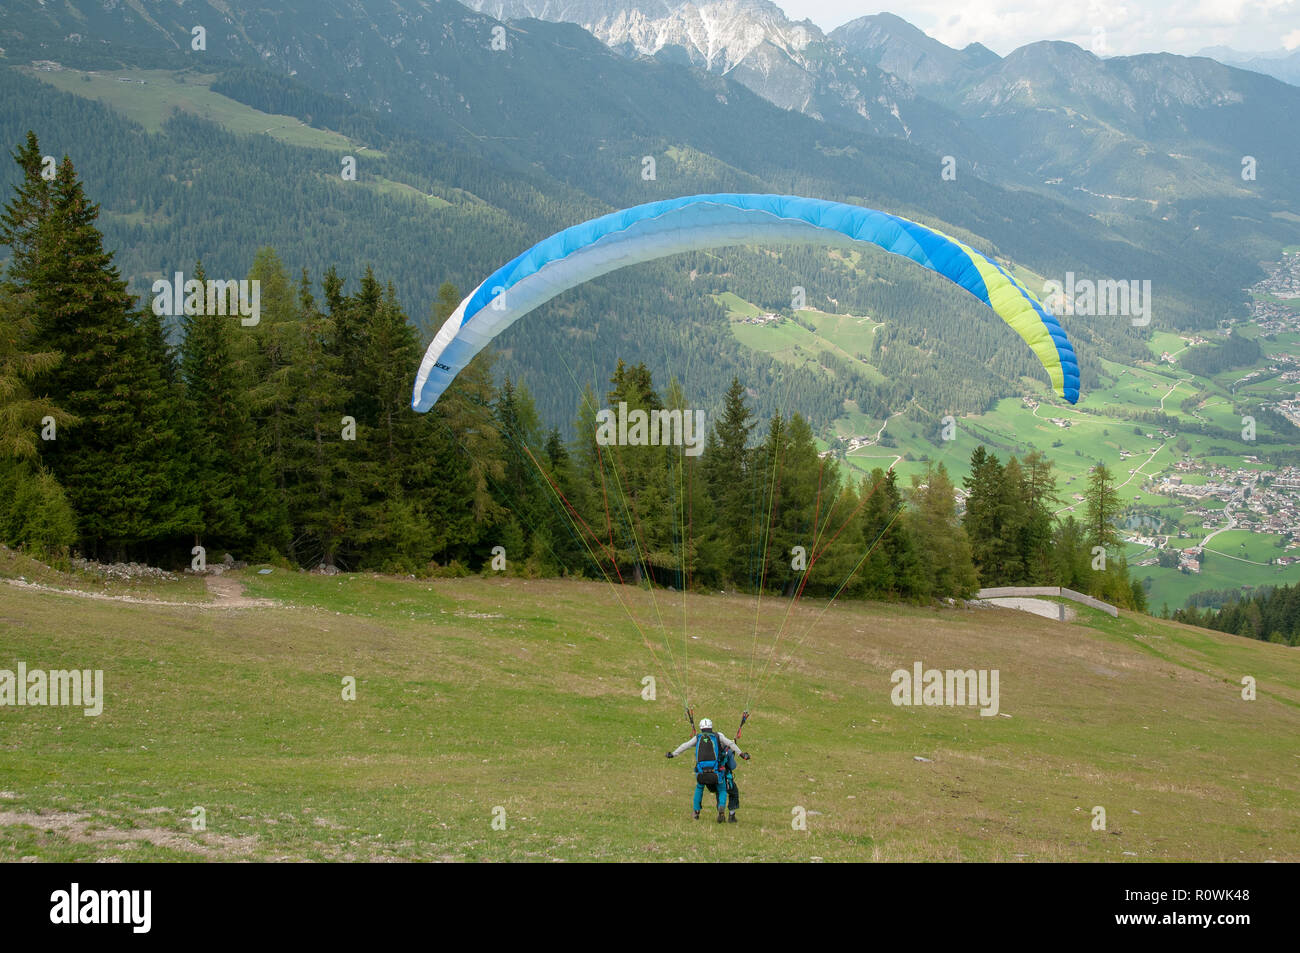 tandem Paragliding from the summit of Elfer Mountain, Neustift, Tyrol, Austria Stock Photo